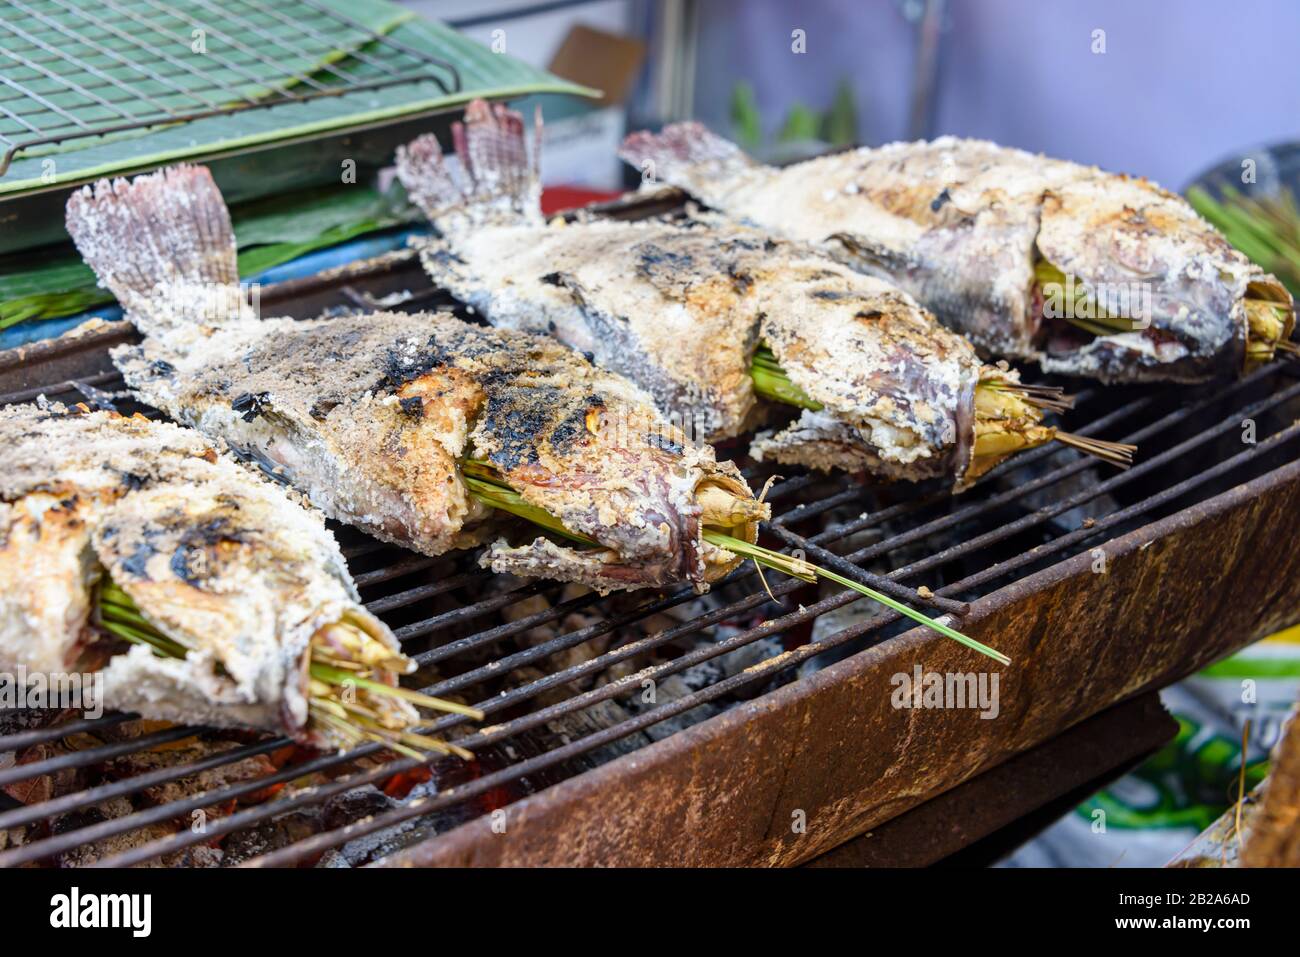 Salted fish with lemongrass being cooked on a barbeque grill at a street food stall, Bangkok, Thailand Stock Photo